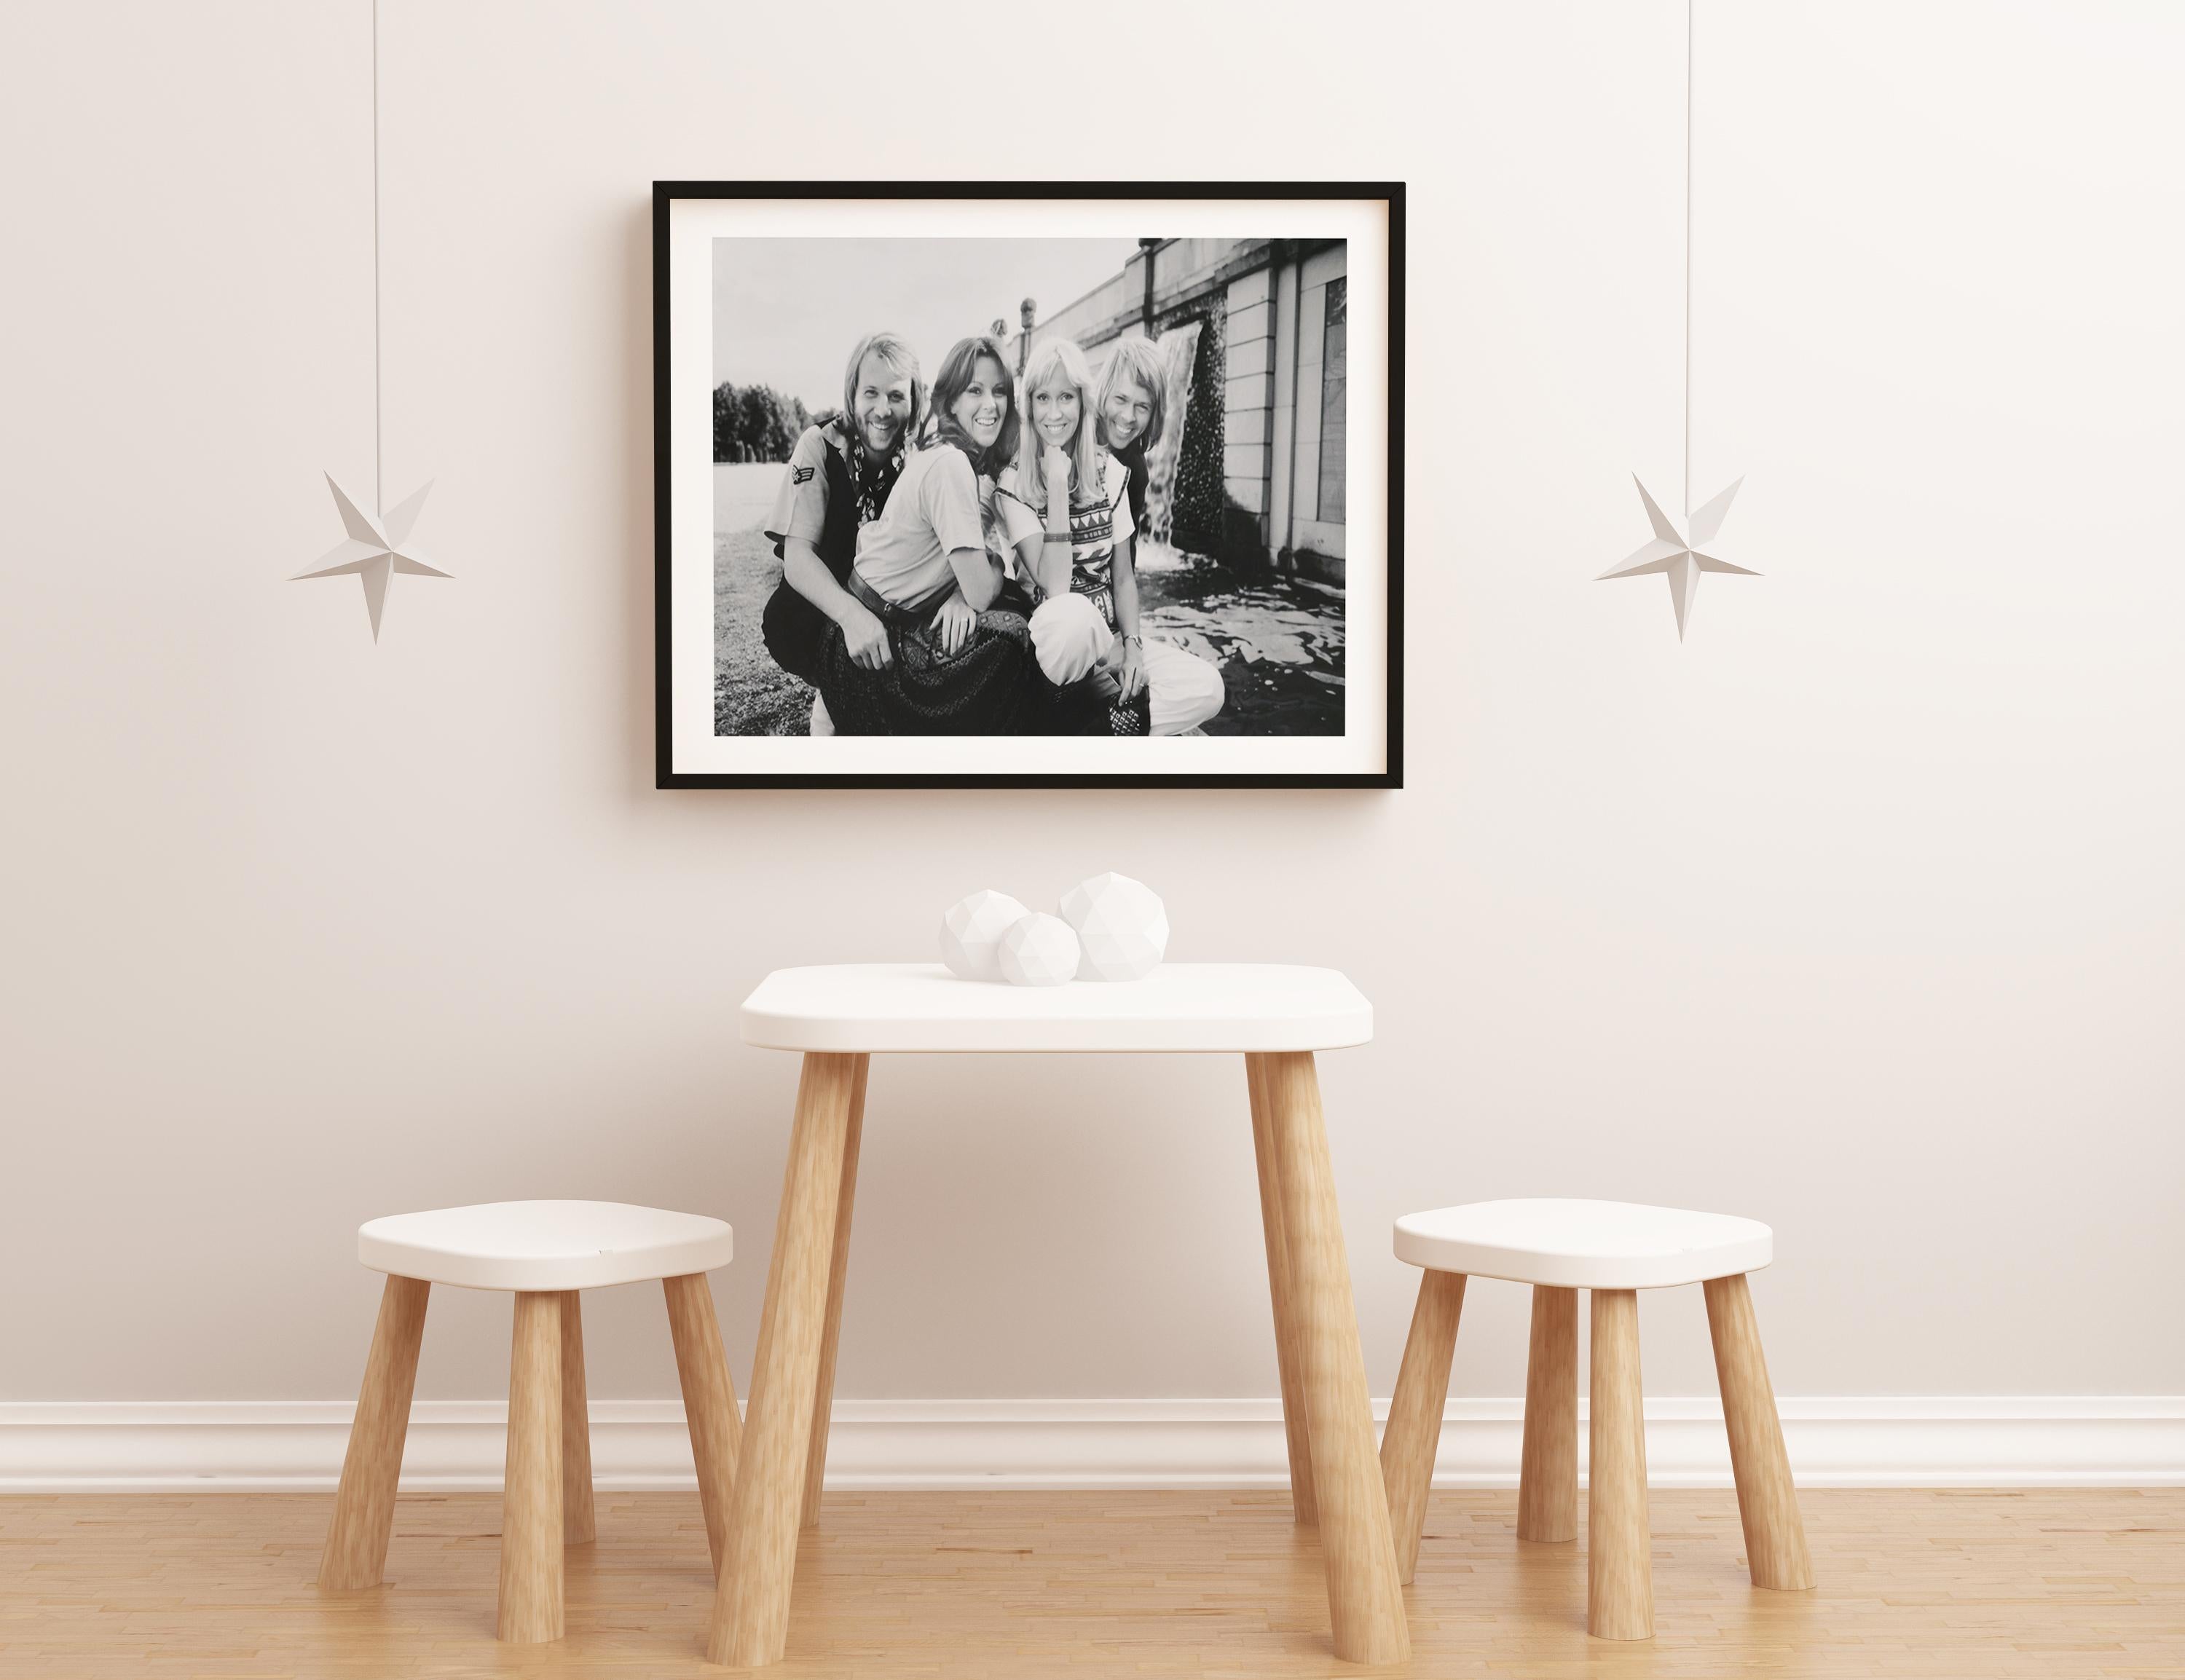 This black and white group portrait features members of the band ABBA (Agnetha Fältskog, Björn Ulvaeus, Benny Andersson, and Anni-Frid Lyngstad) sitting outdoors, smiling together.

ABBA is a Swedish pop group formed in Stockholm in 1972. The